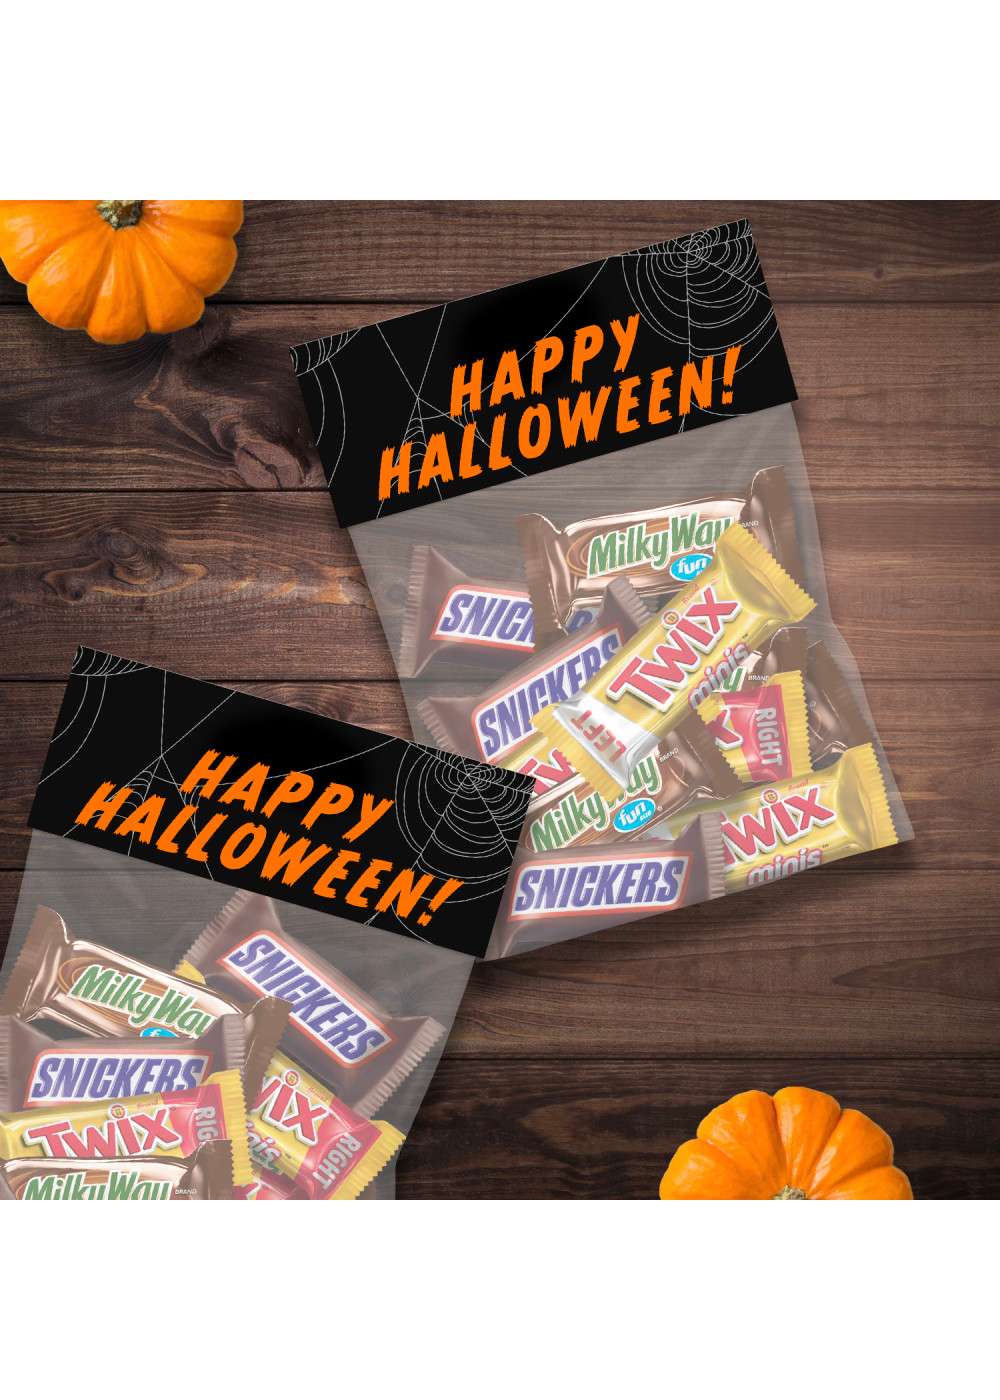 Snickers, Twix & Milky Way Assoted Fun Size Halloween Candy Bars; image 5 of 7